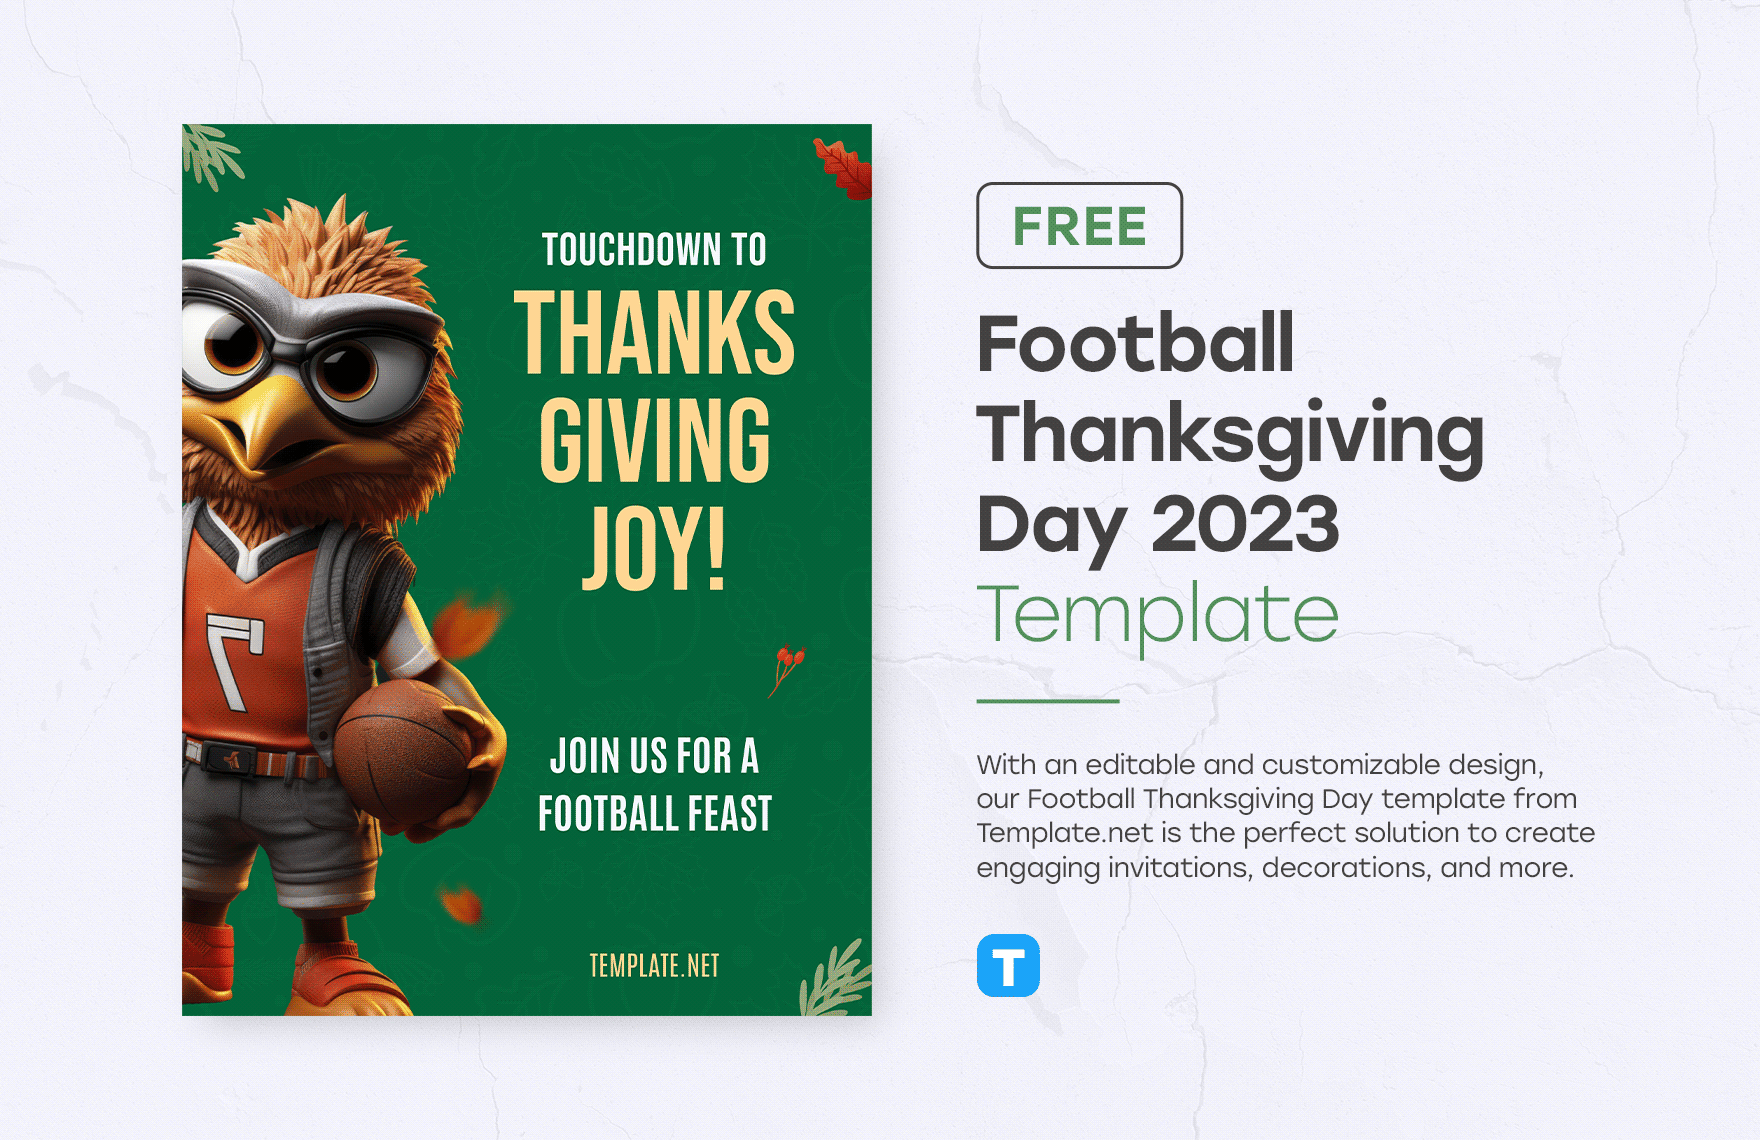 Football Thanksgiving Day 2023 Template